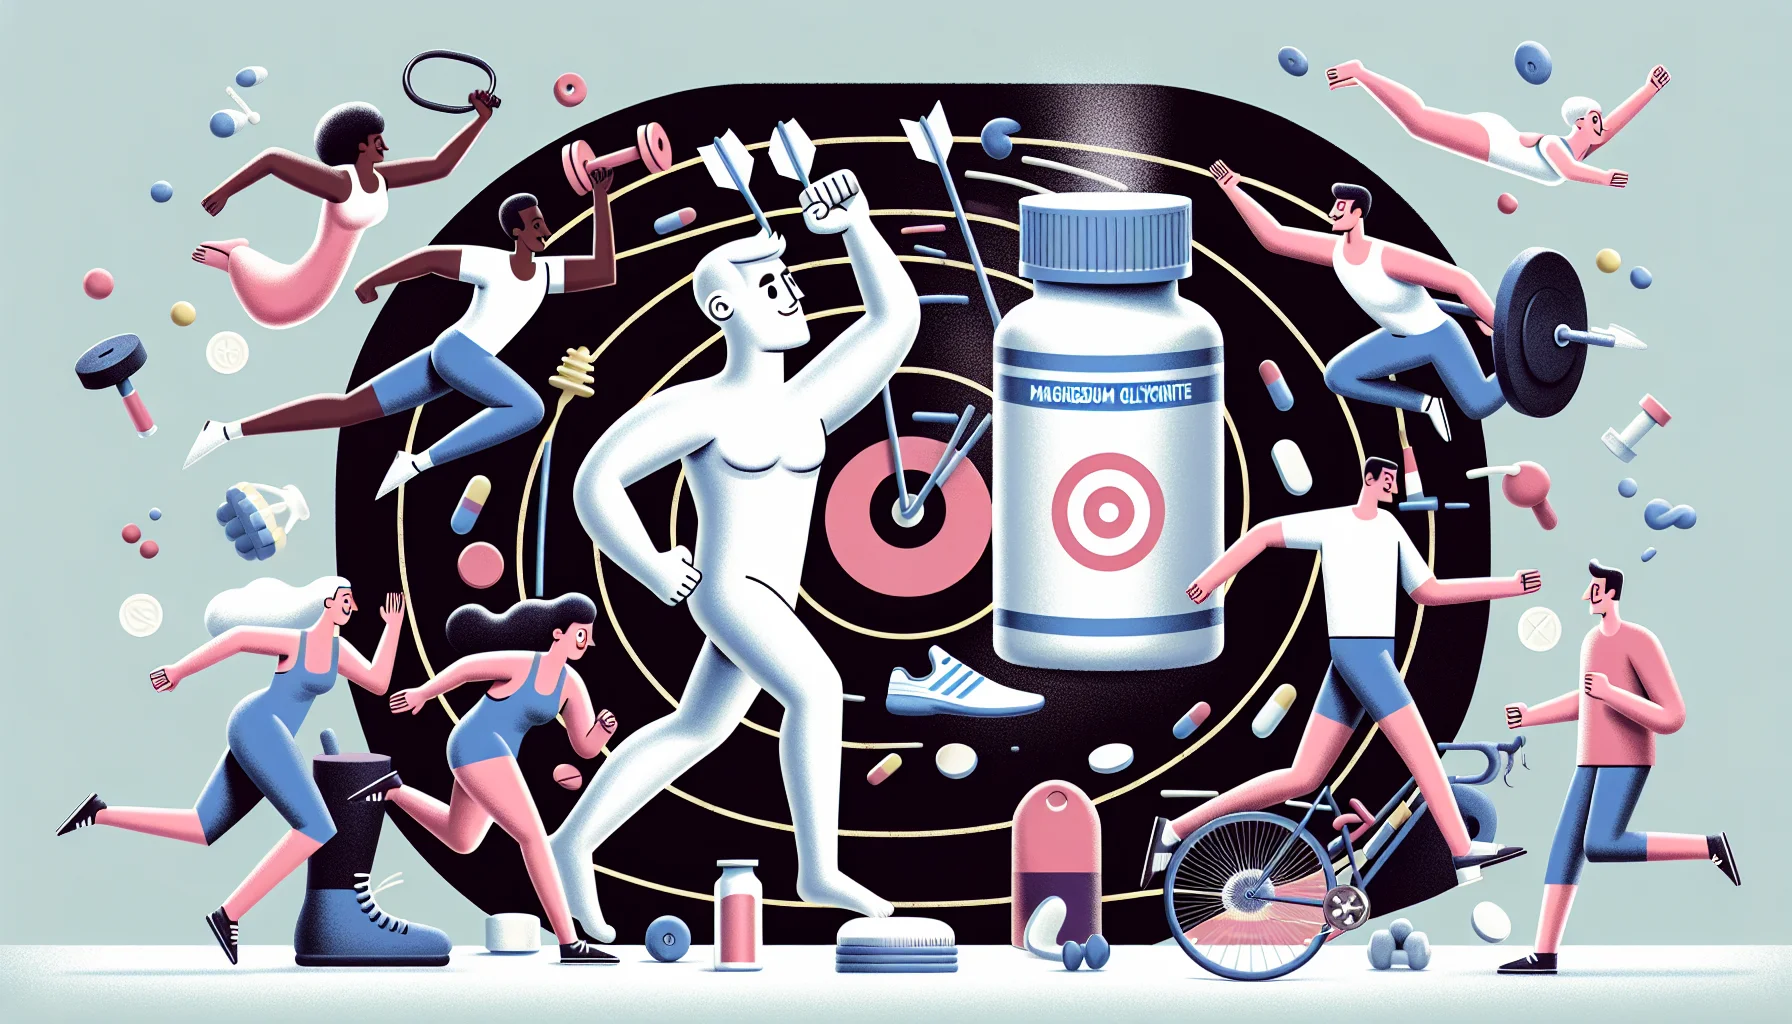 Create a light-hearted, entertaining scene where a target figure is whimsically depicted, designed with a look strongly suggesting magnesium glycinate supplement. Around it, a variety of active individuals, from a Black female runner sprinting, a South Asian male cyclist peddling hard, a Hispanic female swimmer leaping towards the water, to a Caucasian male weightlifter in mid-lift, all are vying to hit the target. The surrounding area is adorned with subtle elements, like dumbbells, swimming goggles, bicycles, running shoes, suggesting the world of sports. This overall situation comically highlights the benefits of taking sports supplements.